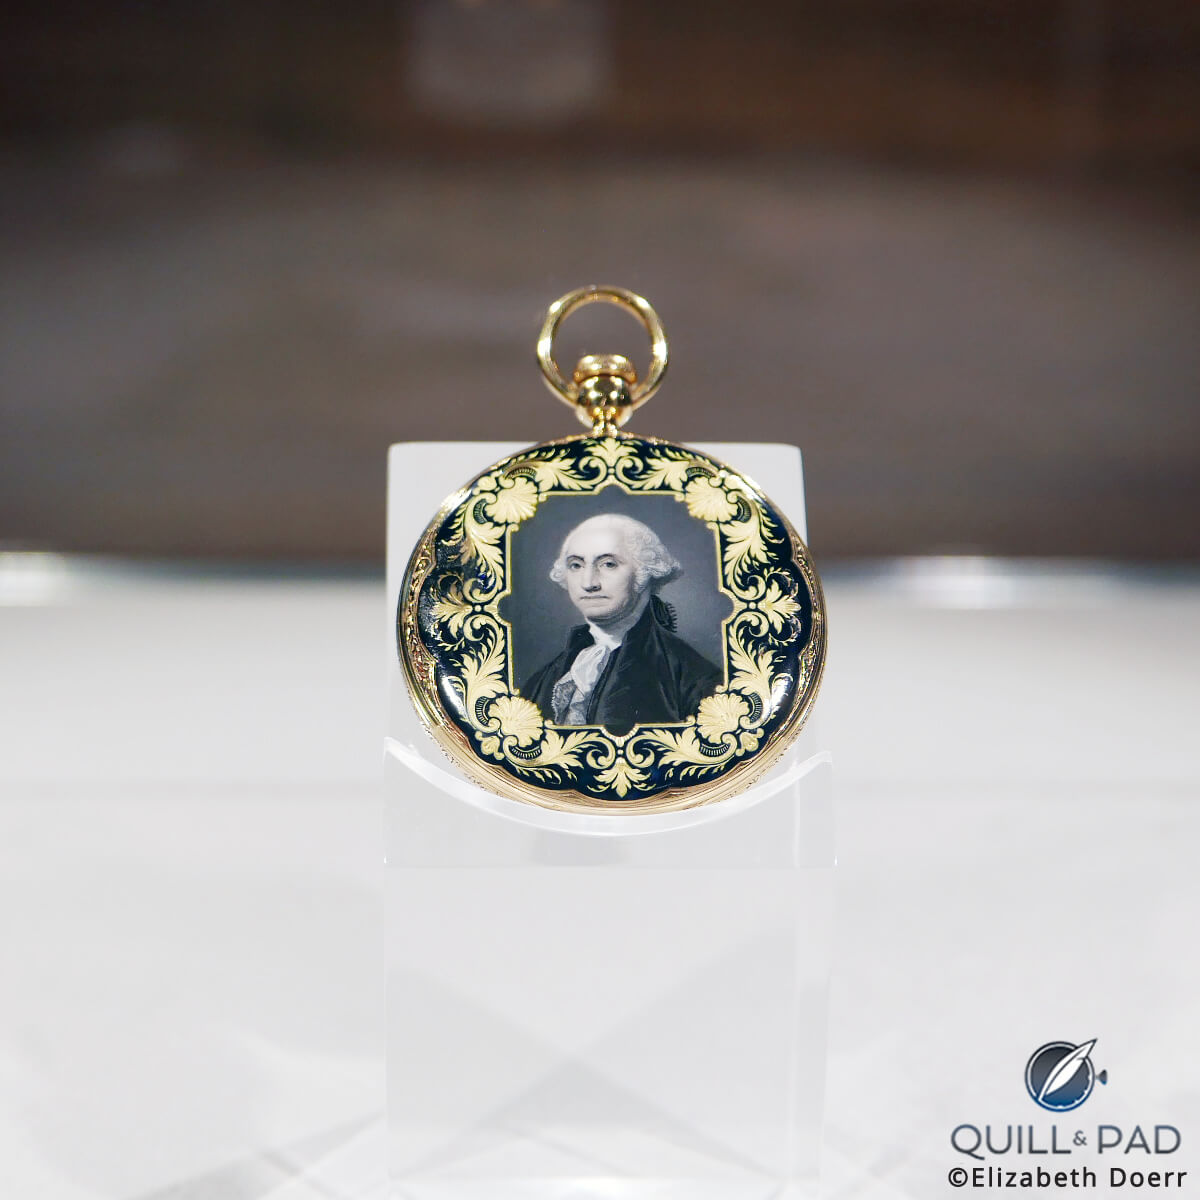 George Washington portrait on the back of the unique piece Patek Philippe created for the Art of Watches Grand Exhibition in New York